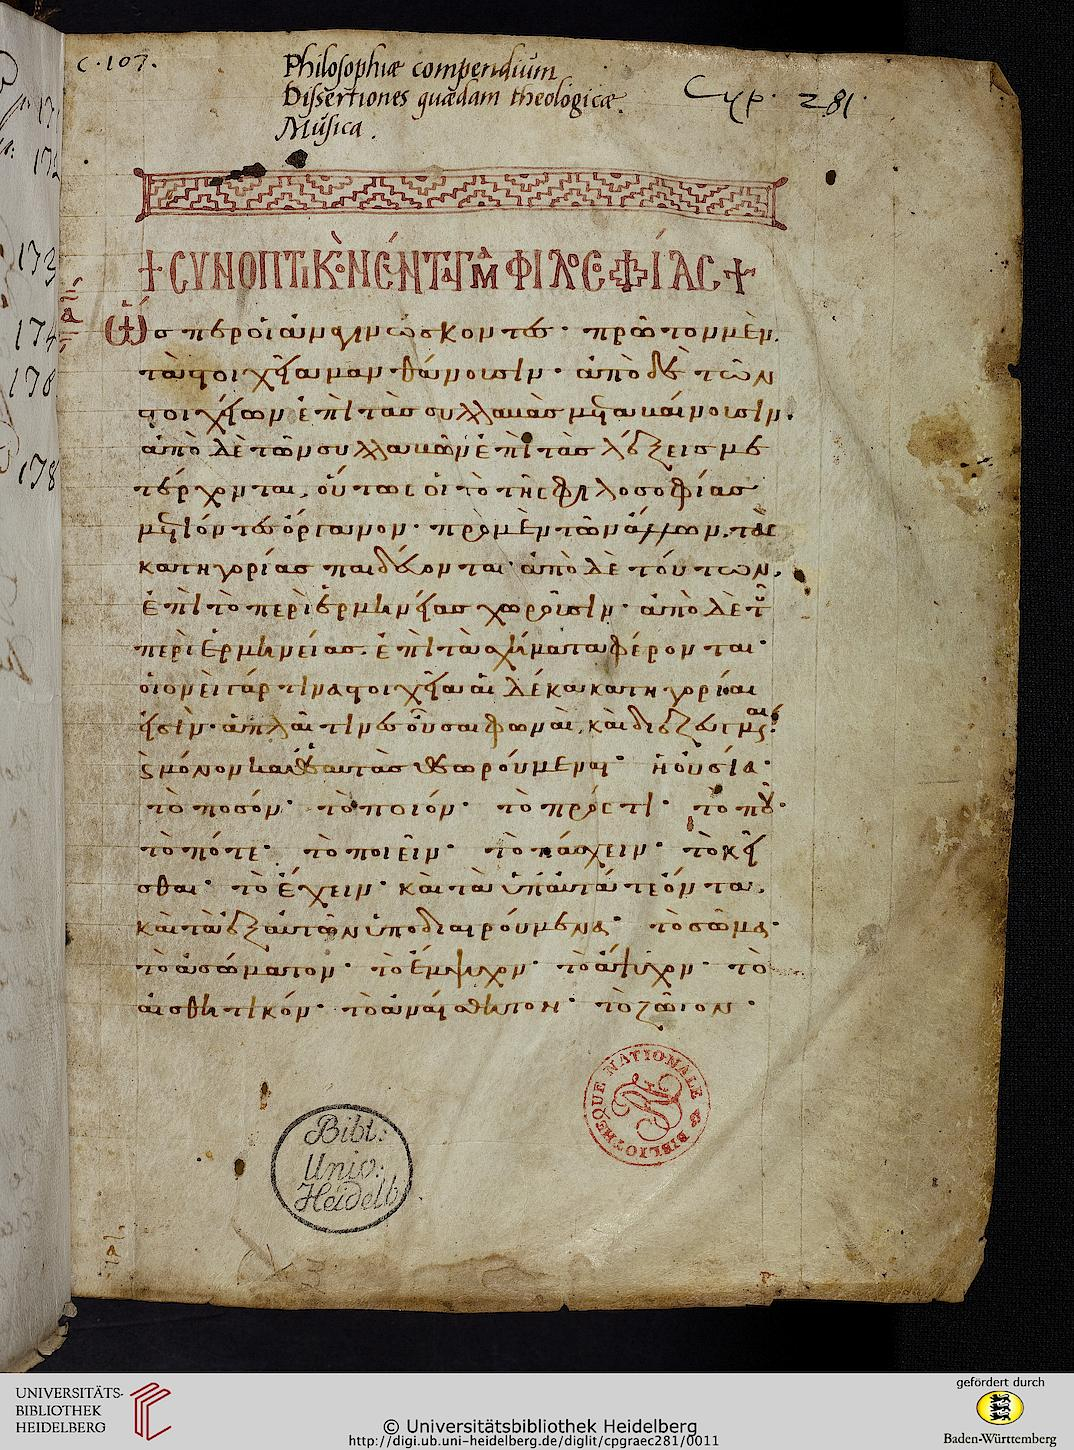 Page from Universitätsbibliothek Heidelberg, Cod. Pal. graec. 281showing Latin writing referencing the text as being Greek musical theory. Please click on image to see full page.